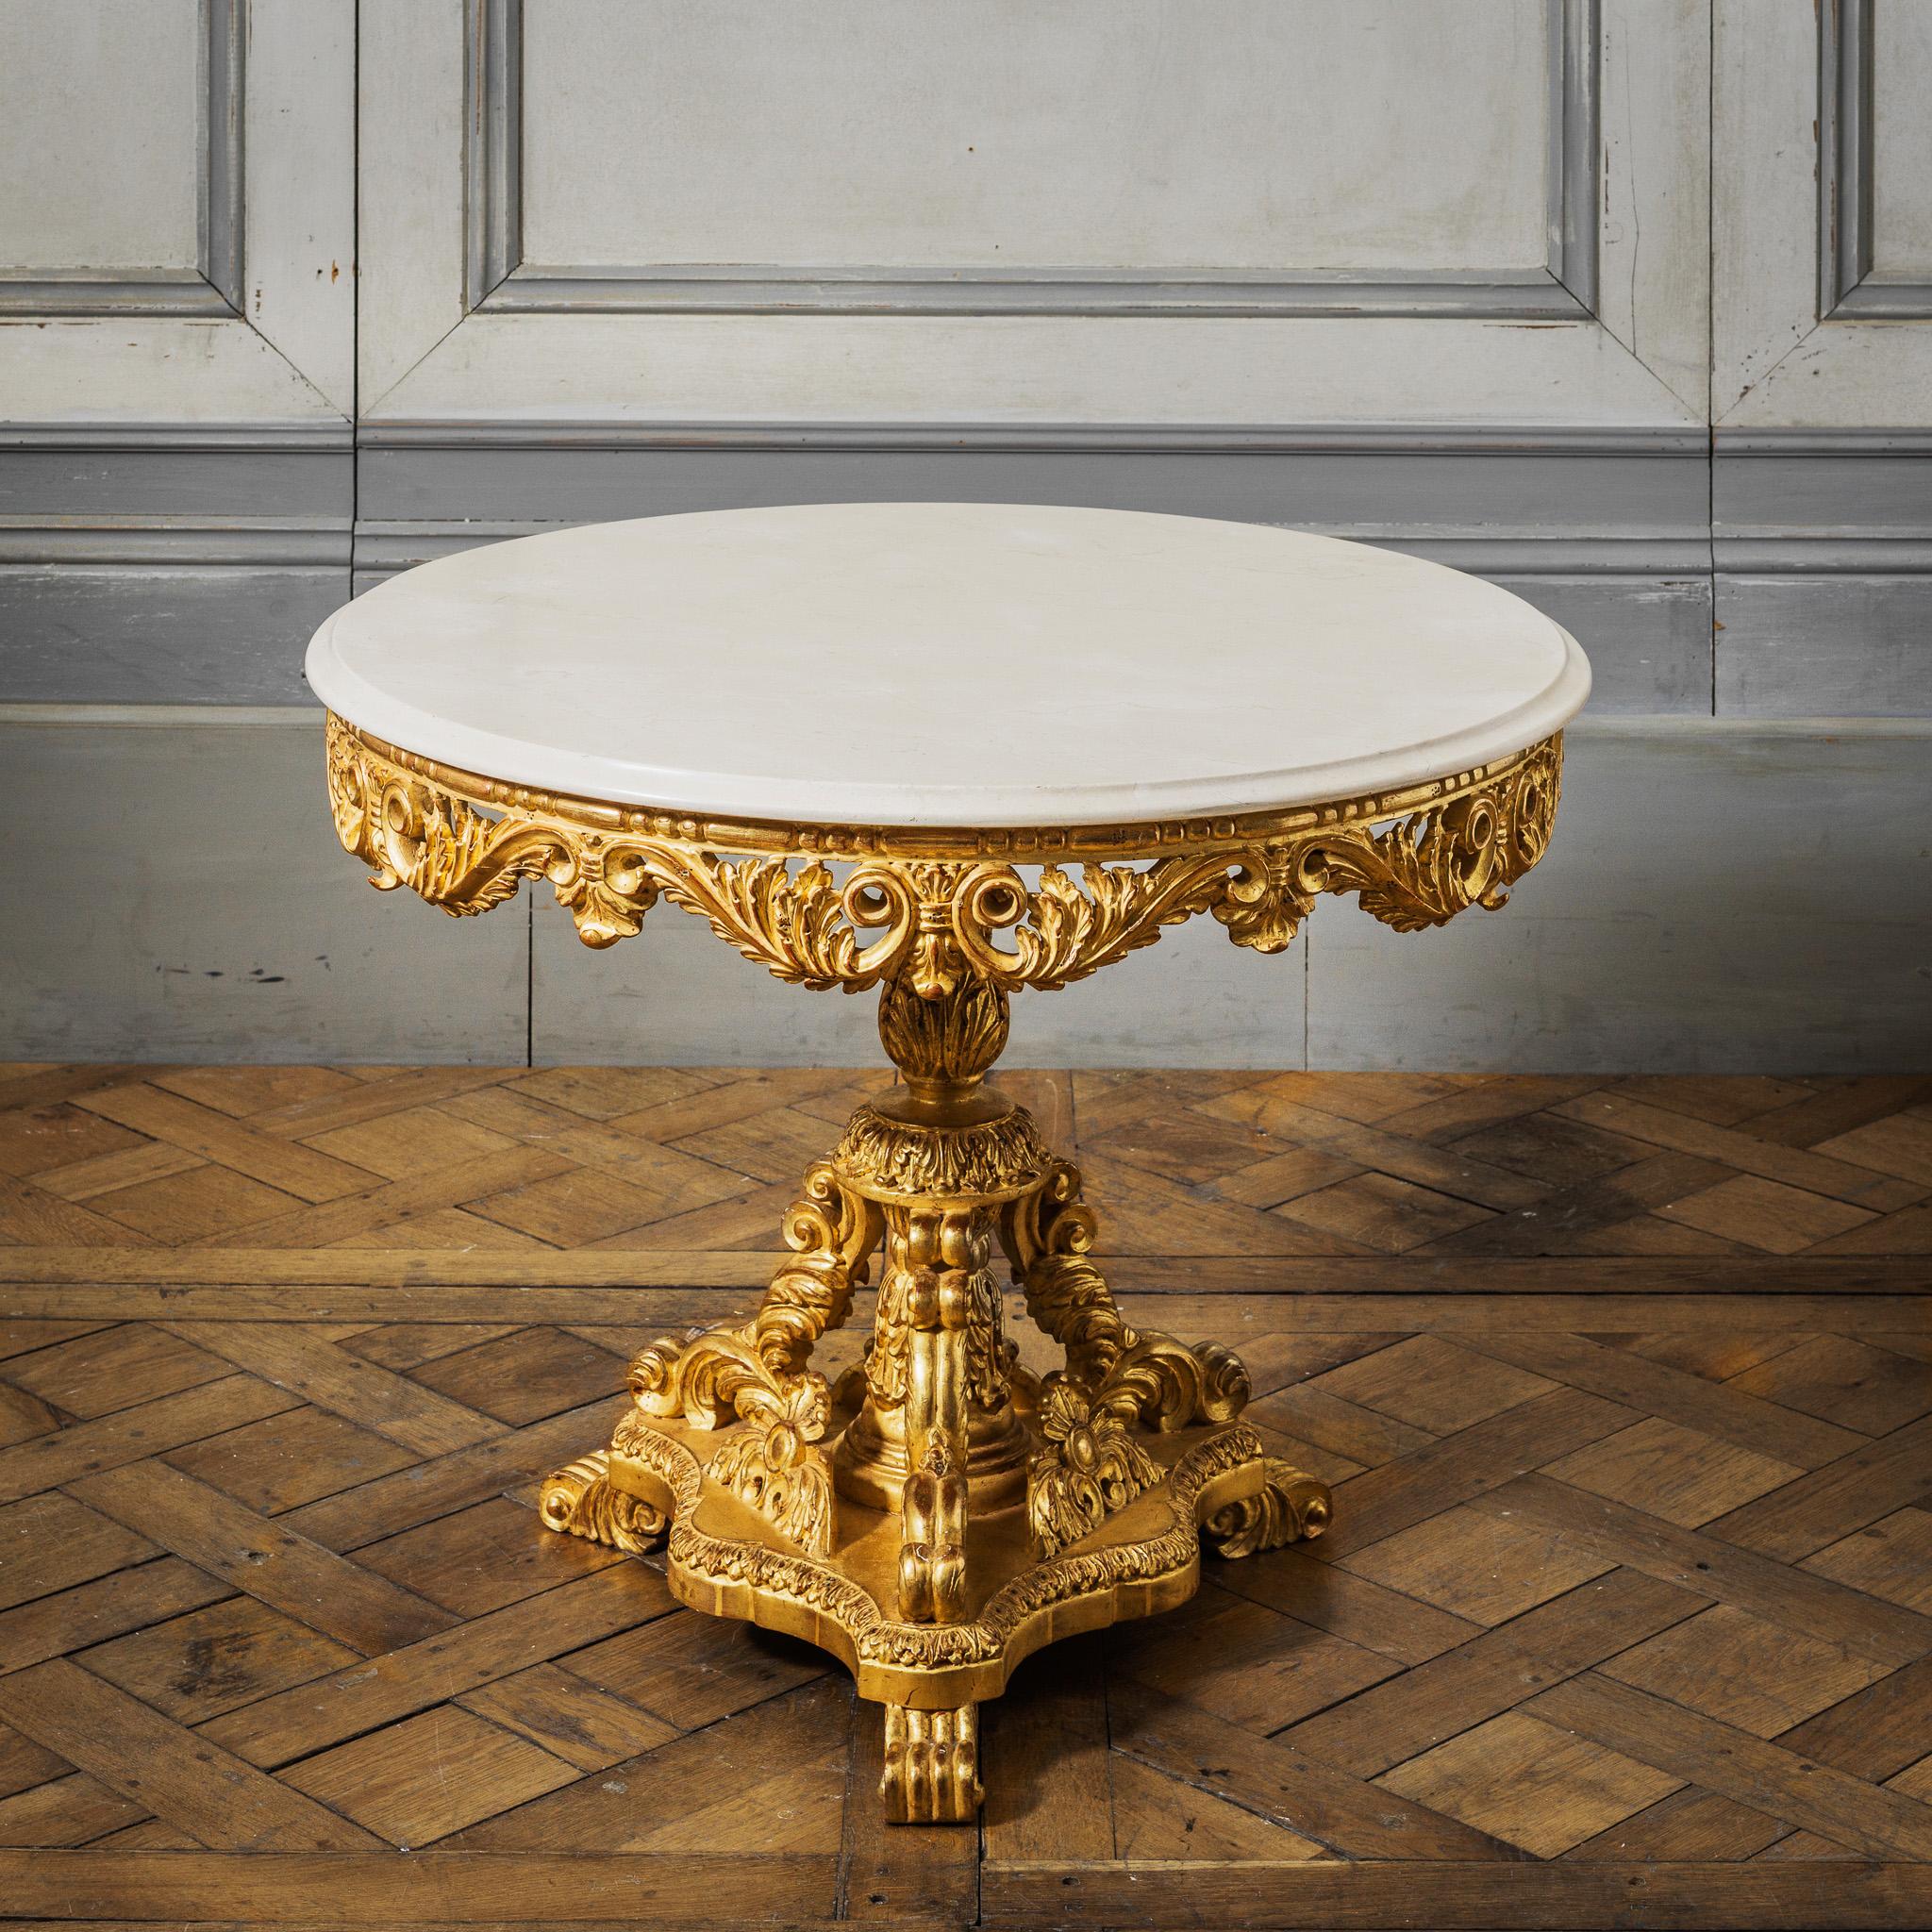 Louis XIV style Giltwood end tables or side tables
with a Crema Marfill Marble top with a honed finish .
Gilded with 23.75 K gold.
Very Fine Carving made by Master Craftsman.
We have a pair in stock if needed.